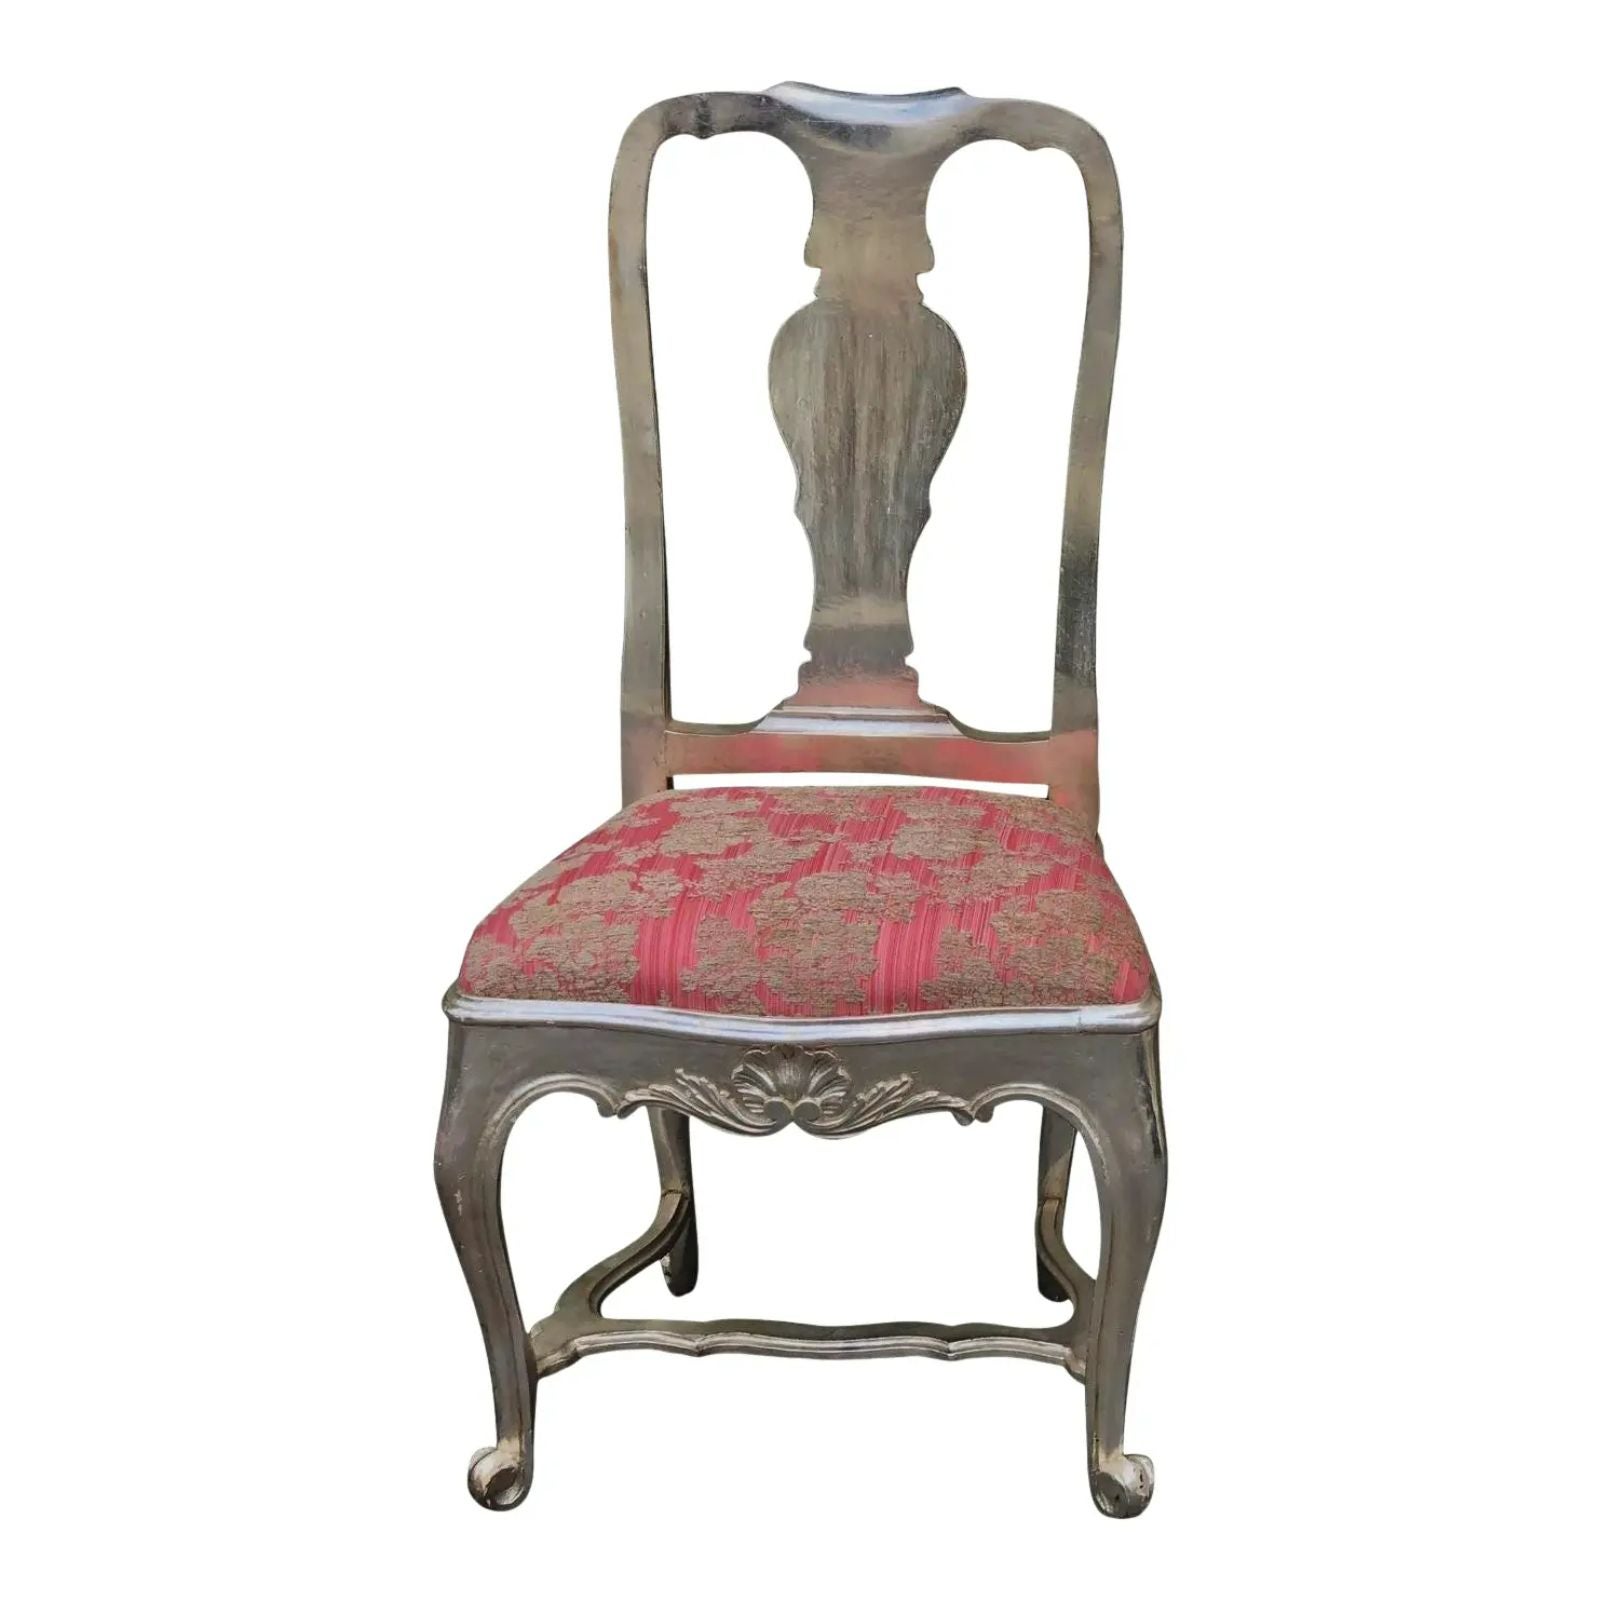 Antique George III Silverleaf Giltwood & Pink Chenille Side Chair, 18th Century For Sale